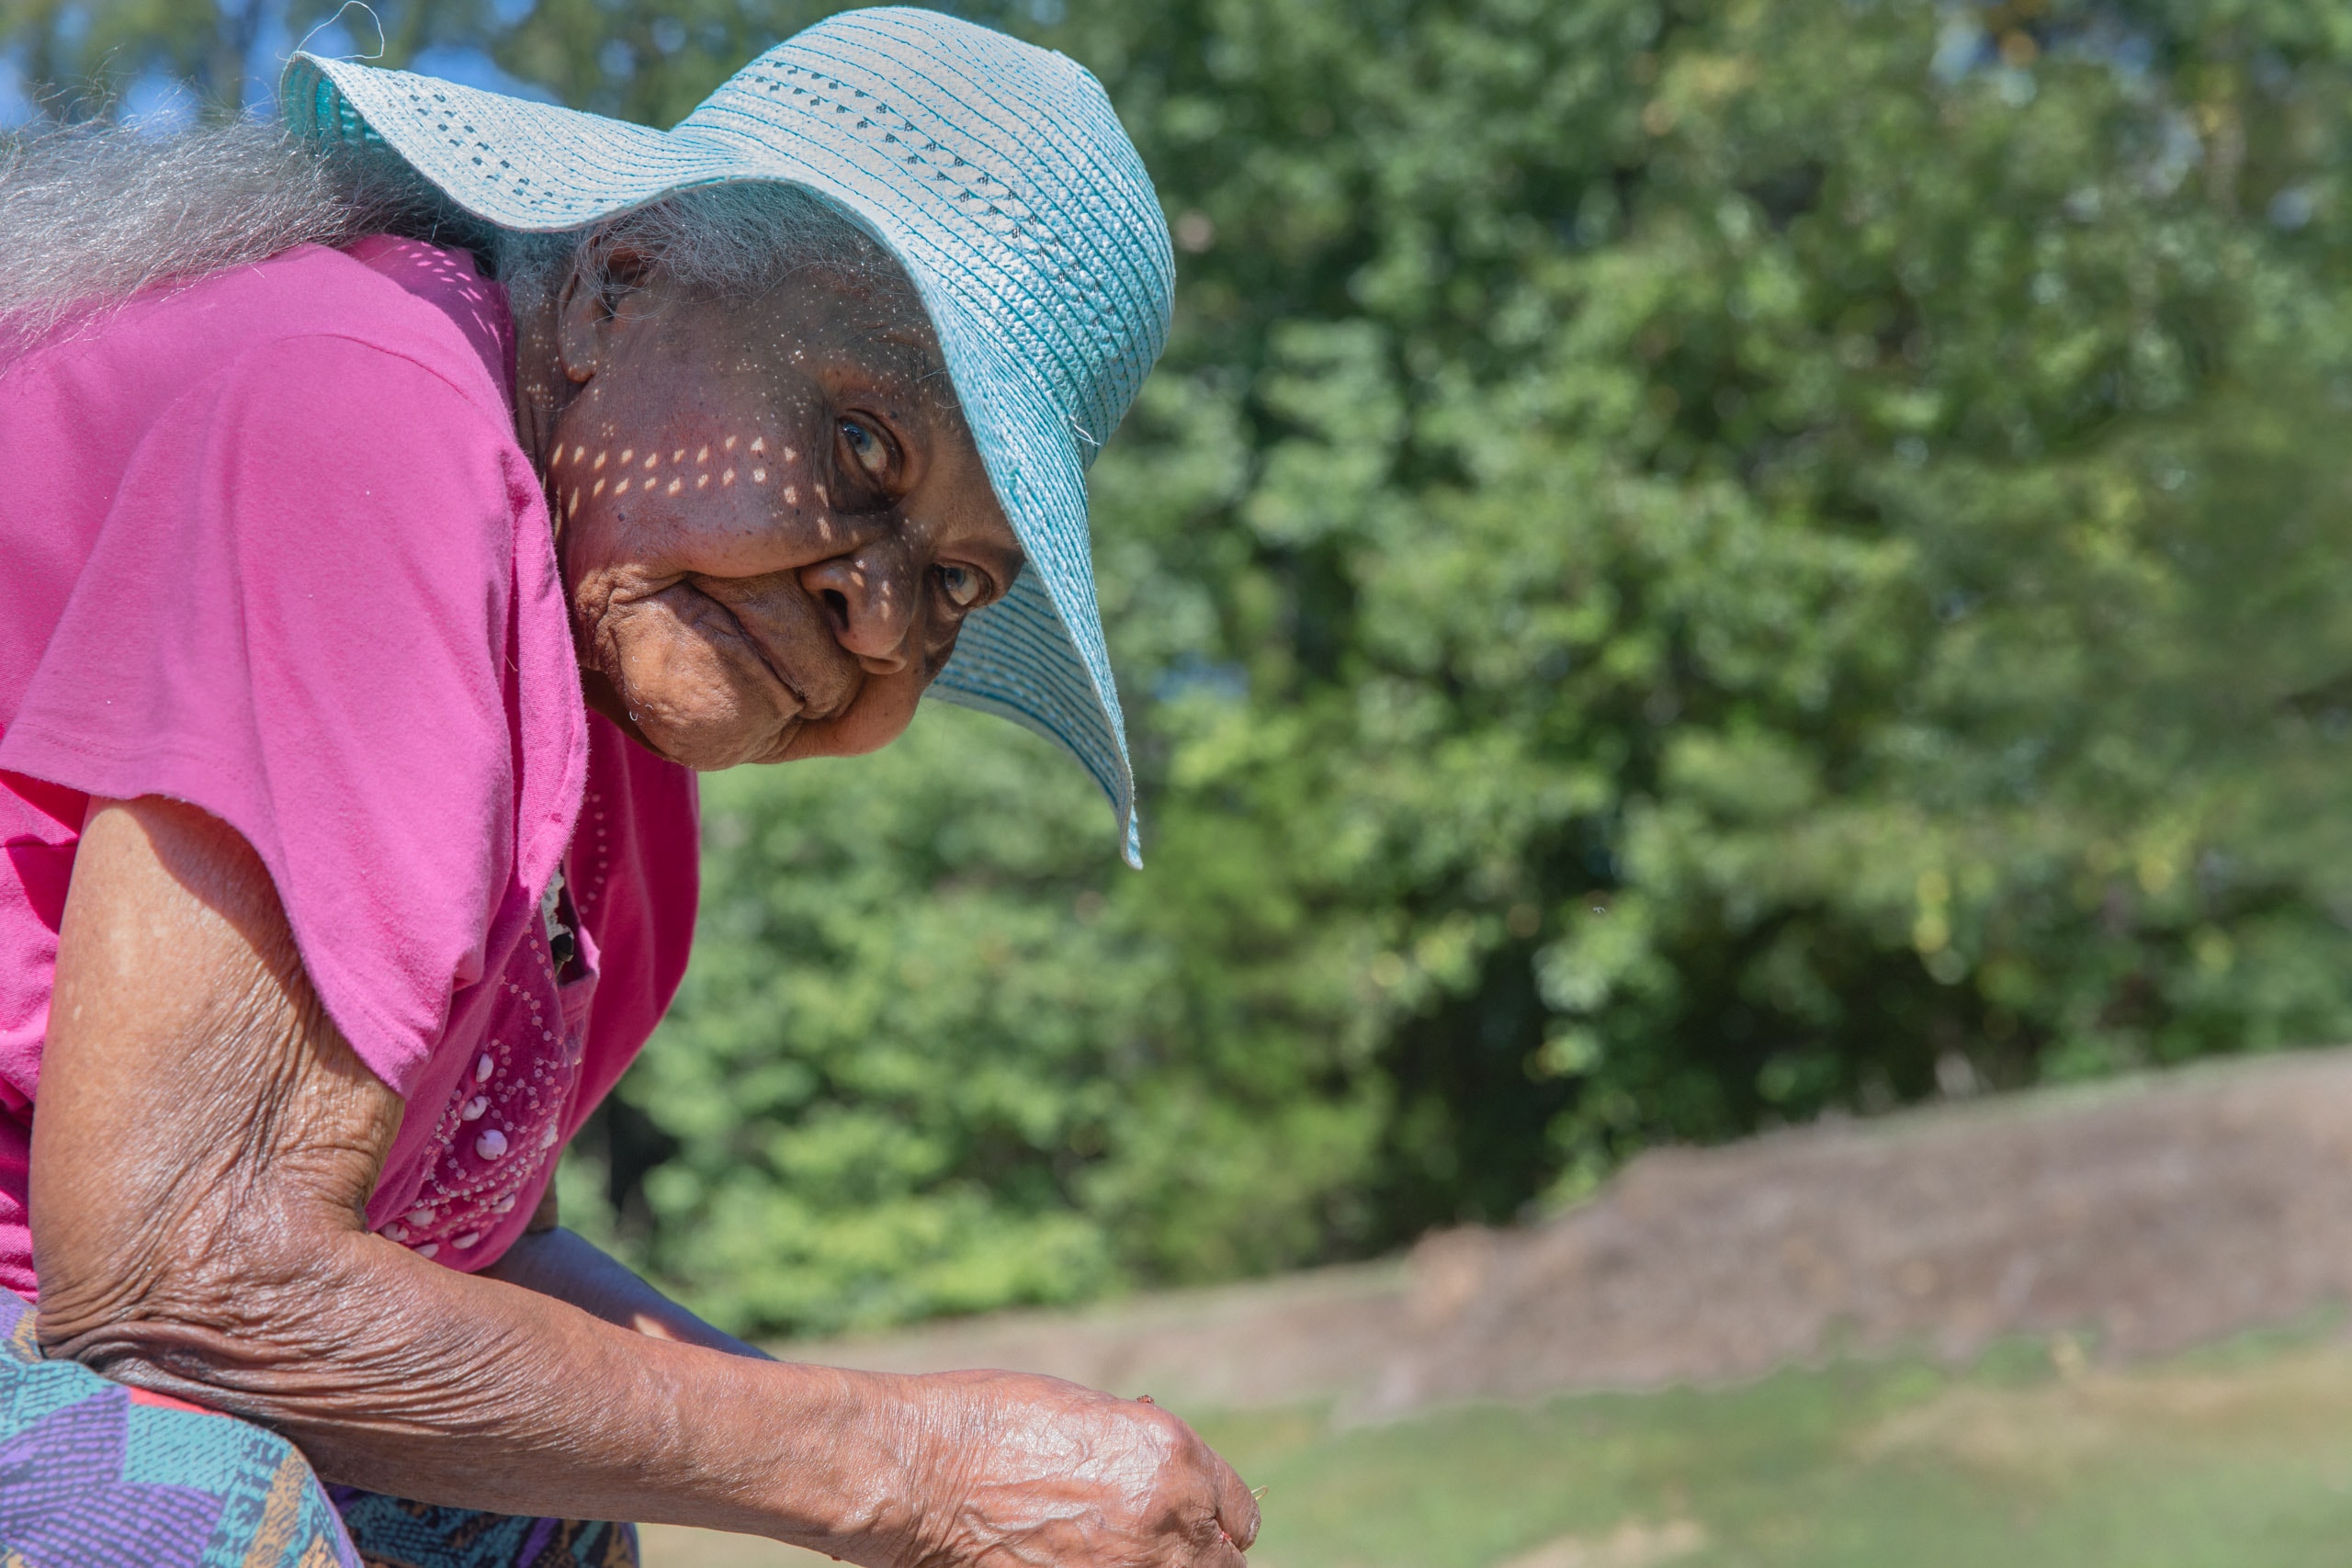 Medium close up of a 100 year old woman outside wearing a light blue sun hat and pink shirt. She is sitting perpendicular to the camer and has her head tirned to the camera lens. She has acurious and relaxed look on her face. Her eyes are light blue like her hat. This photograph is part of the To Live 10,000 Years series by Danny Goldfield.